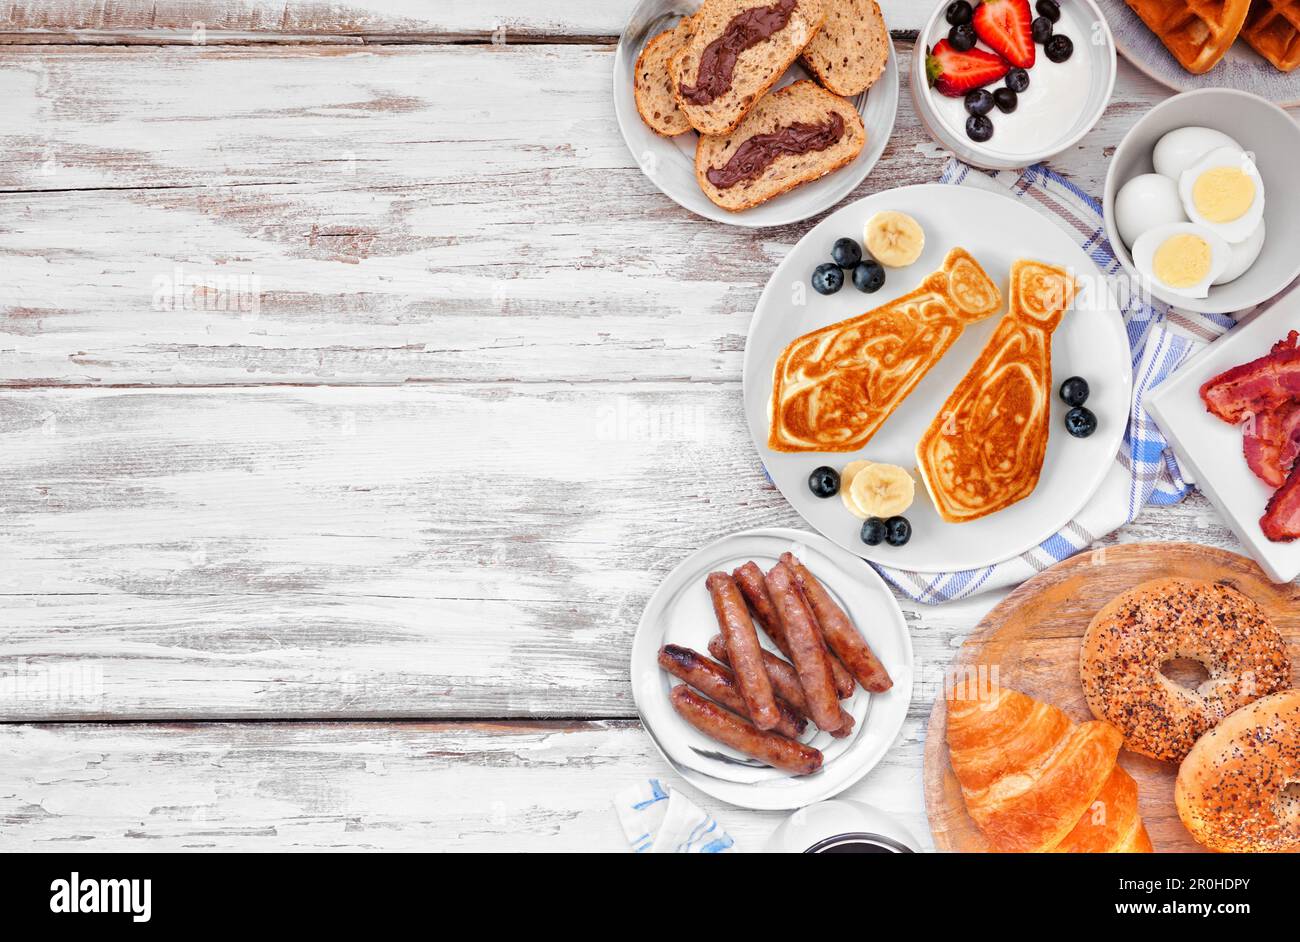 Fathers Day brunch side border. Top view on a white wood background. Tie pancakes, mustache toast and a variety of dad themed food. Stock Photo